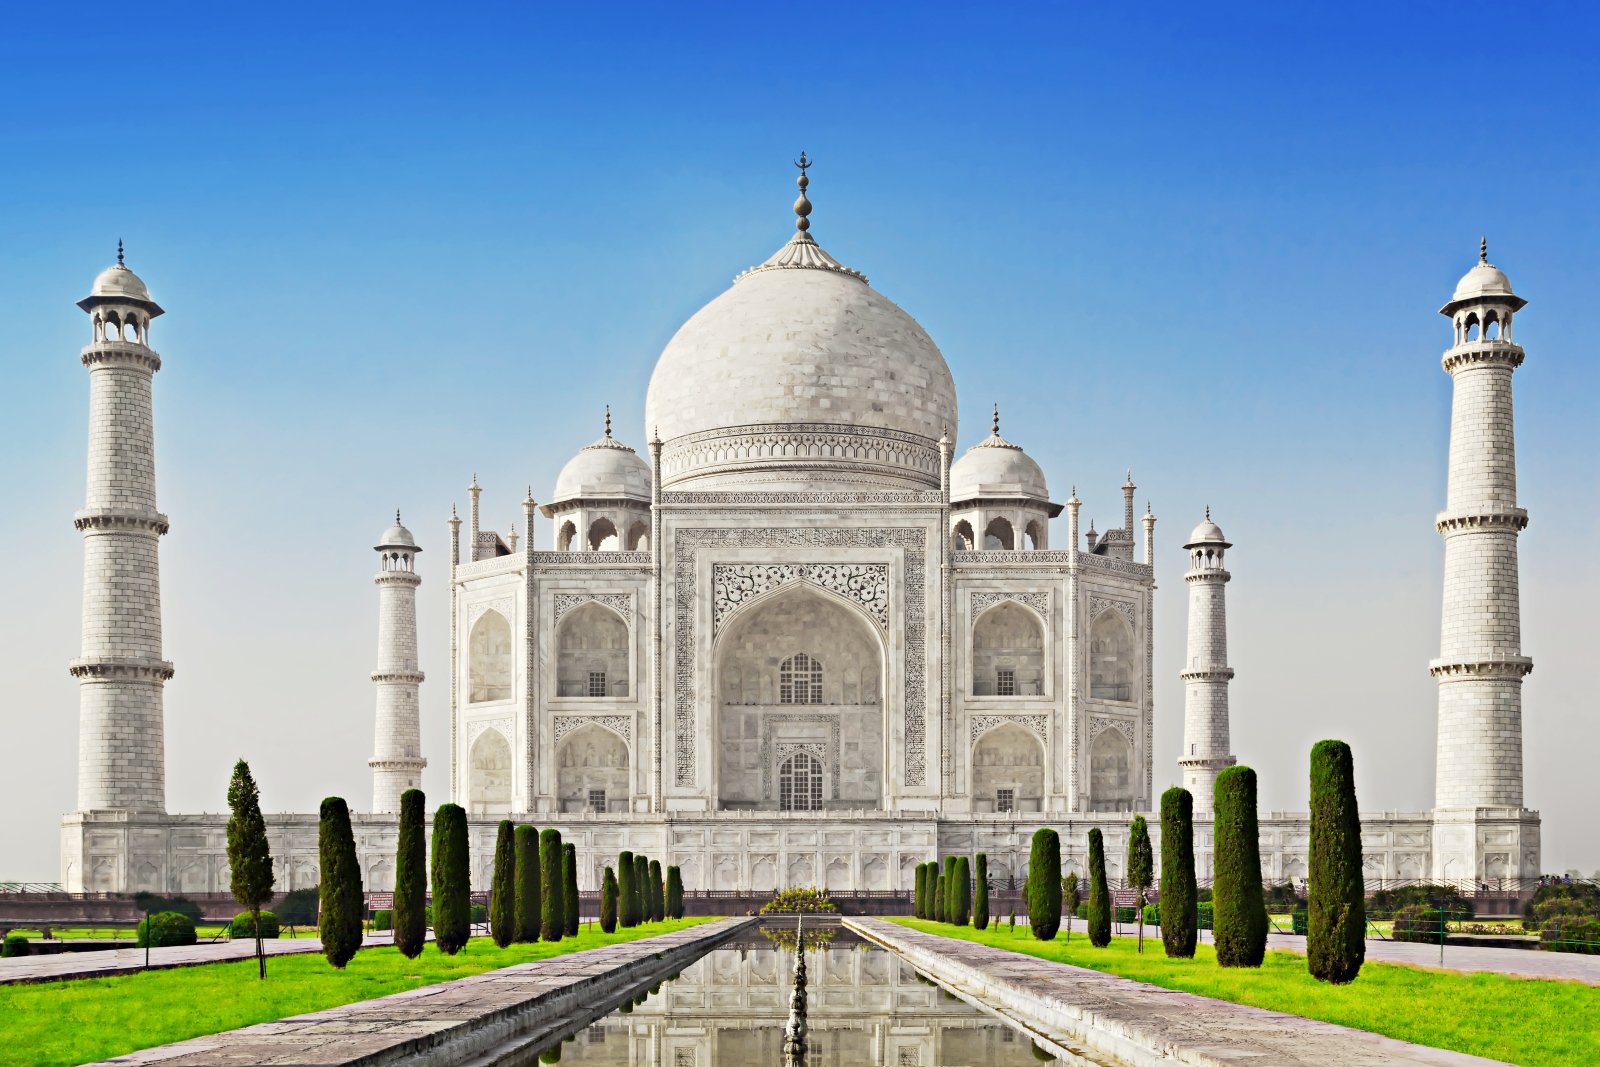 <p>The <strong>Taj Mahal</strong> in Agra, India, was built by the Mughal emperor Shah Jahan in memory of his beloved wife.</p><p>Completed in 1653, this ivory-white marble mausoleum showcases intricate details, such as floral patterns and geometric shapes, that blend Persian, Islamic, and Indian architectural styles.</p><p>The Taj Mahal is best visited at sunrise or sunset, when the soft, golden light enhances its mesmerizing beauty.</p>